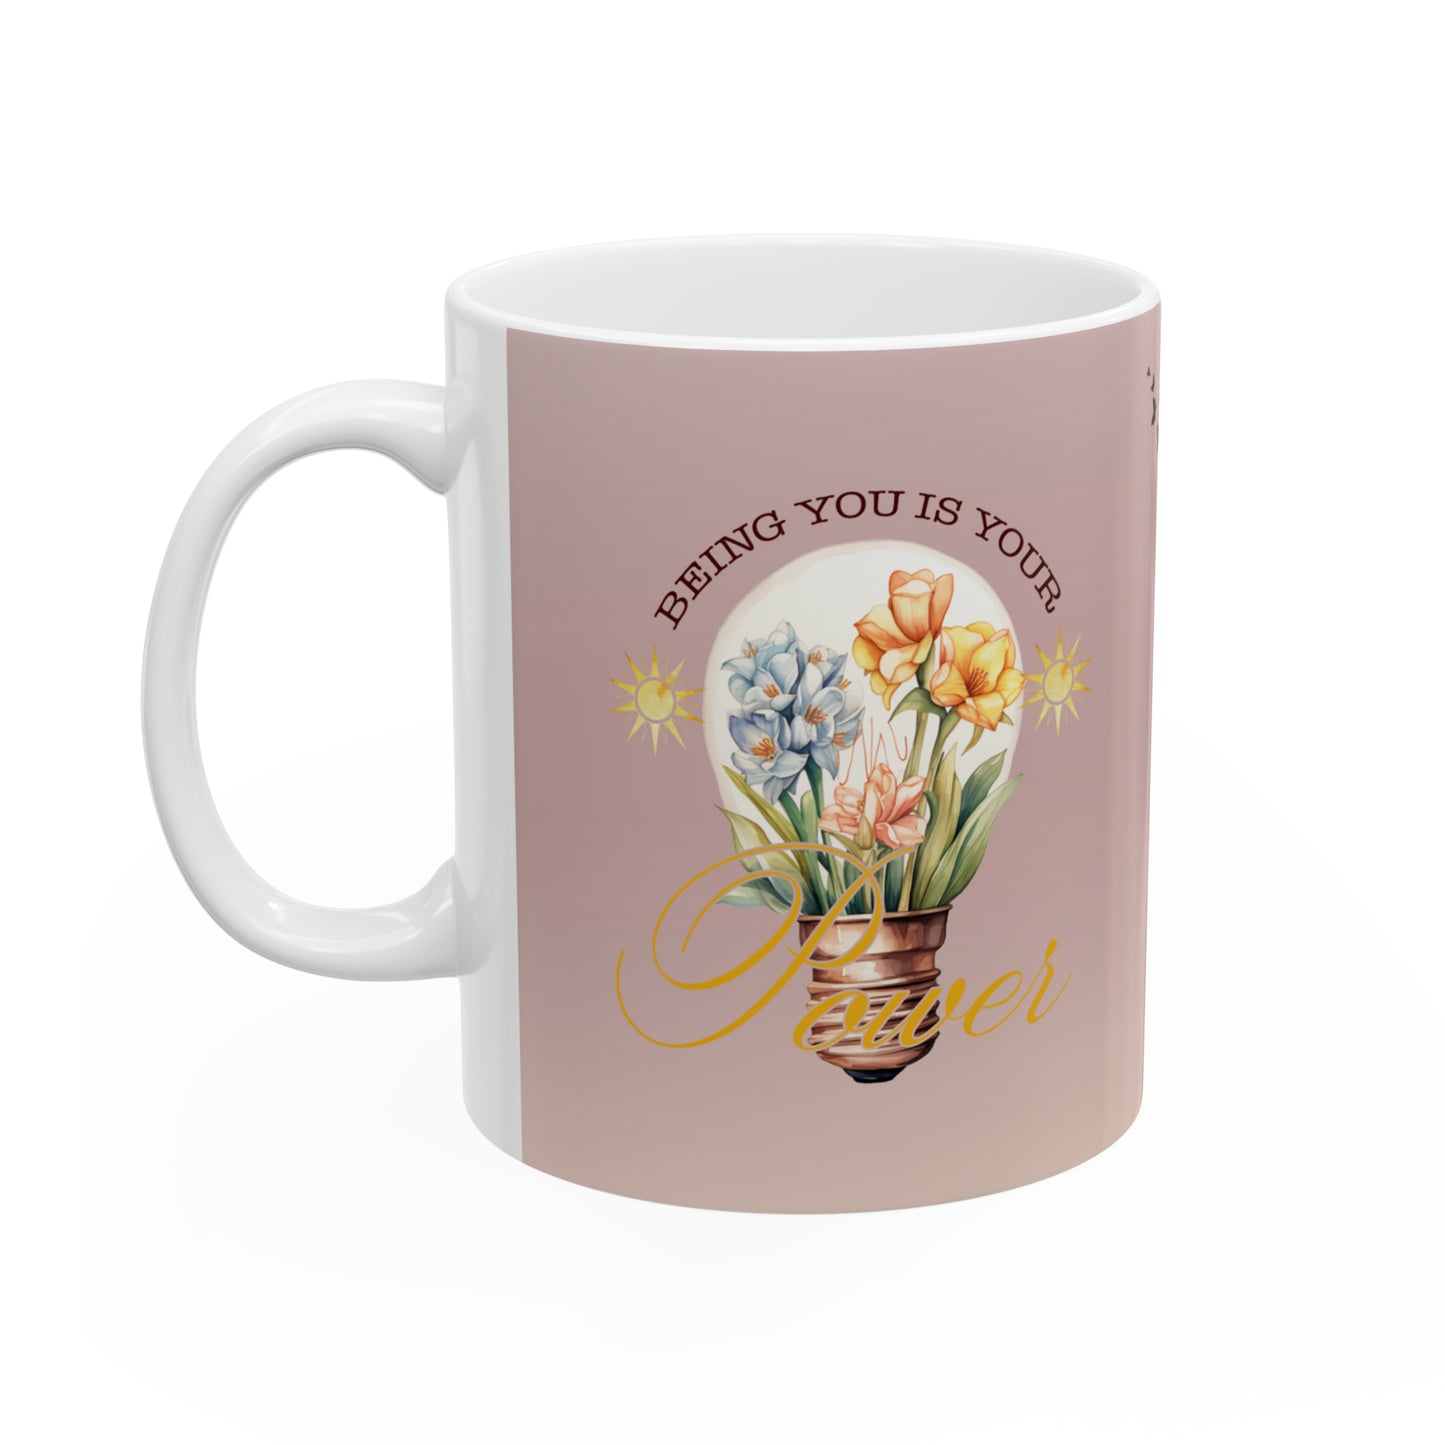 Being You Is Your Power Self-Empowerment Mug